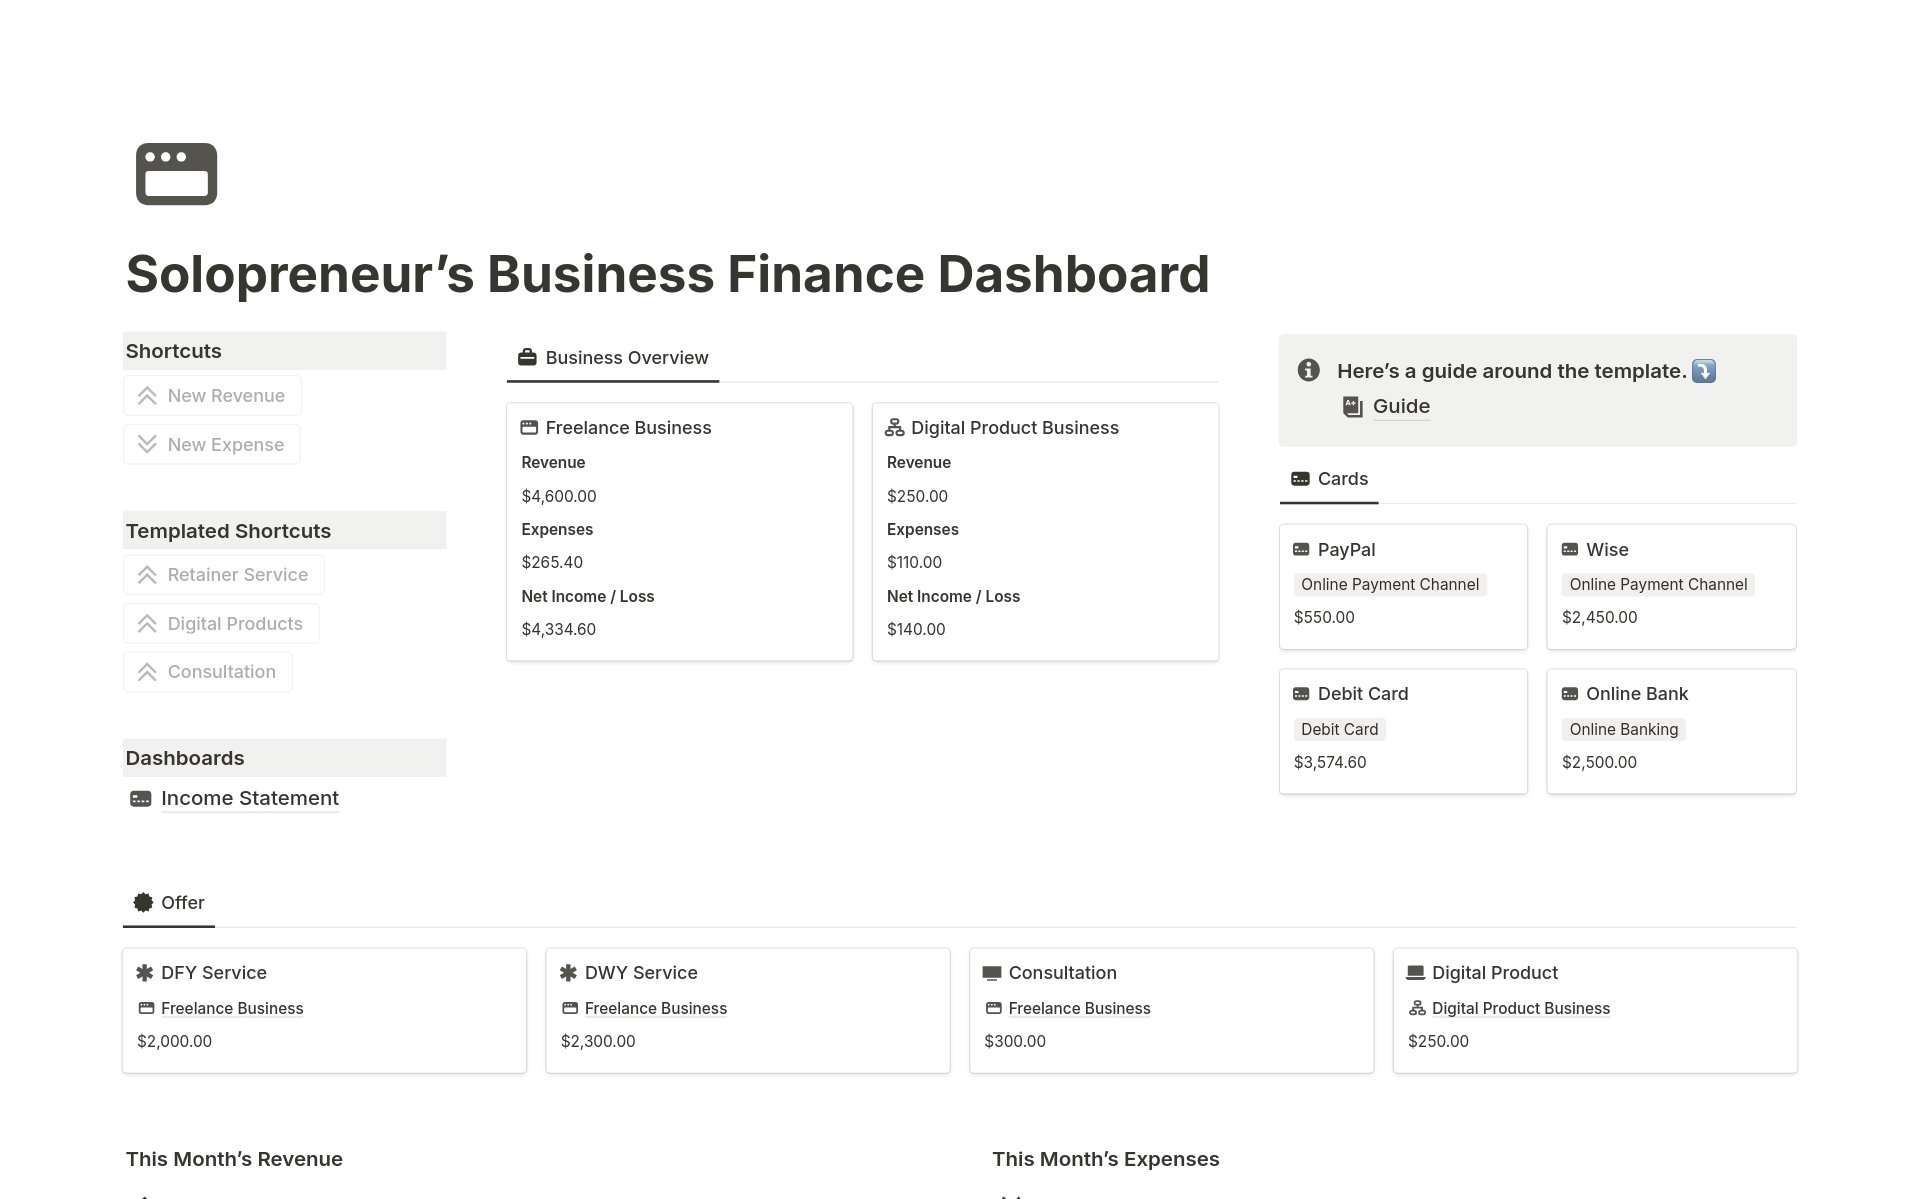 Beat the solopreneur financial overwhelm with a finance dashboard that prioritizes the essentials.